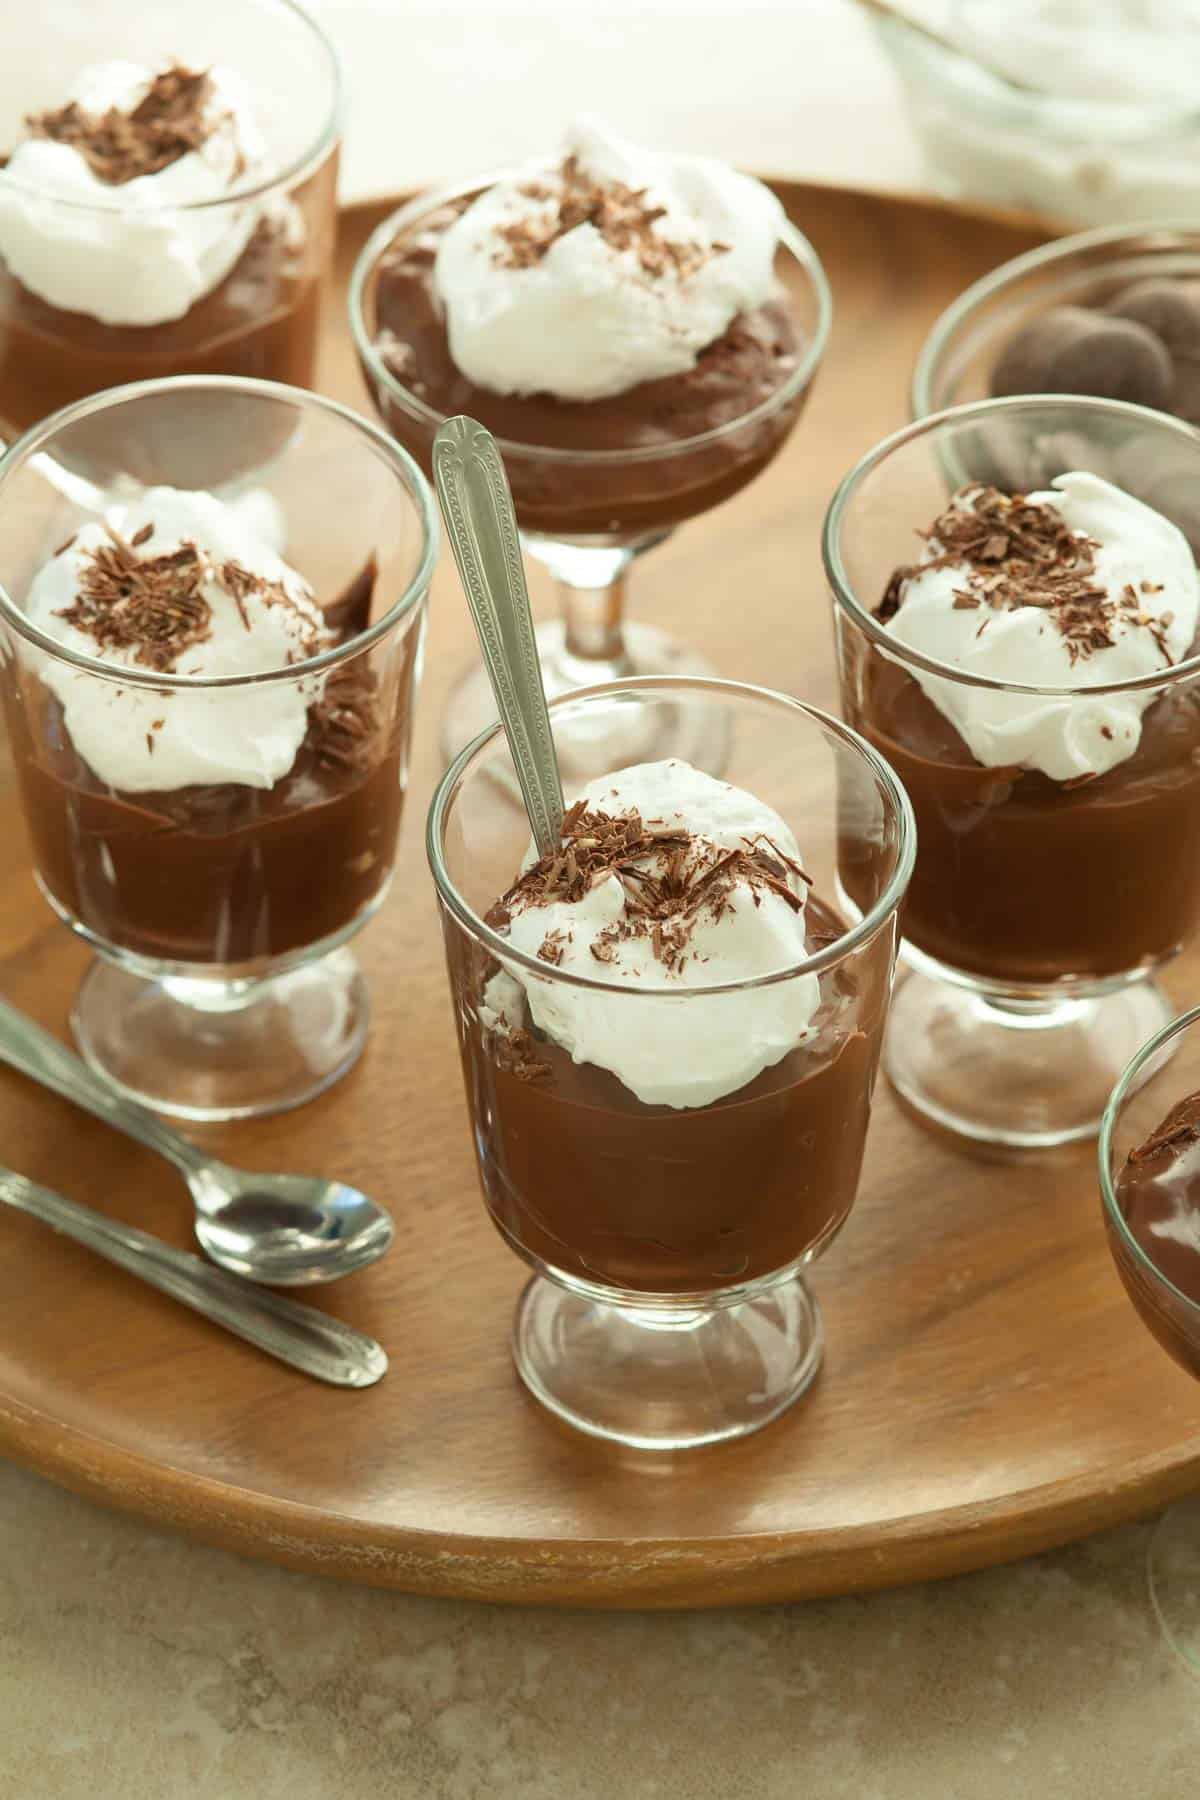 Vegan Chocolate Pudding in Cups